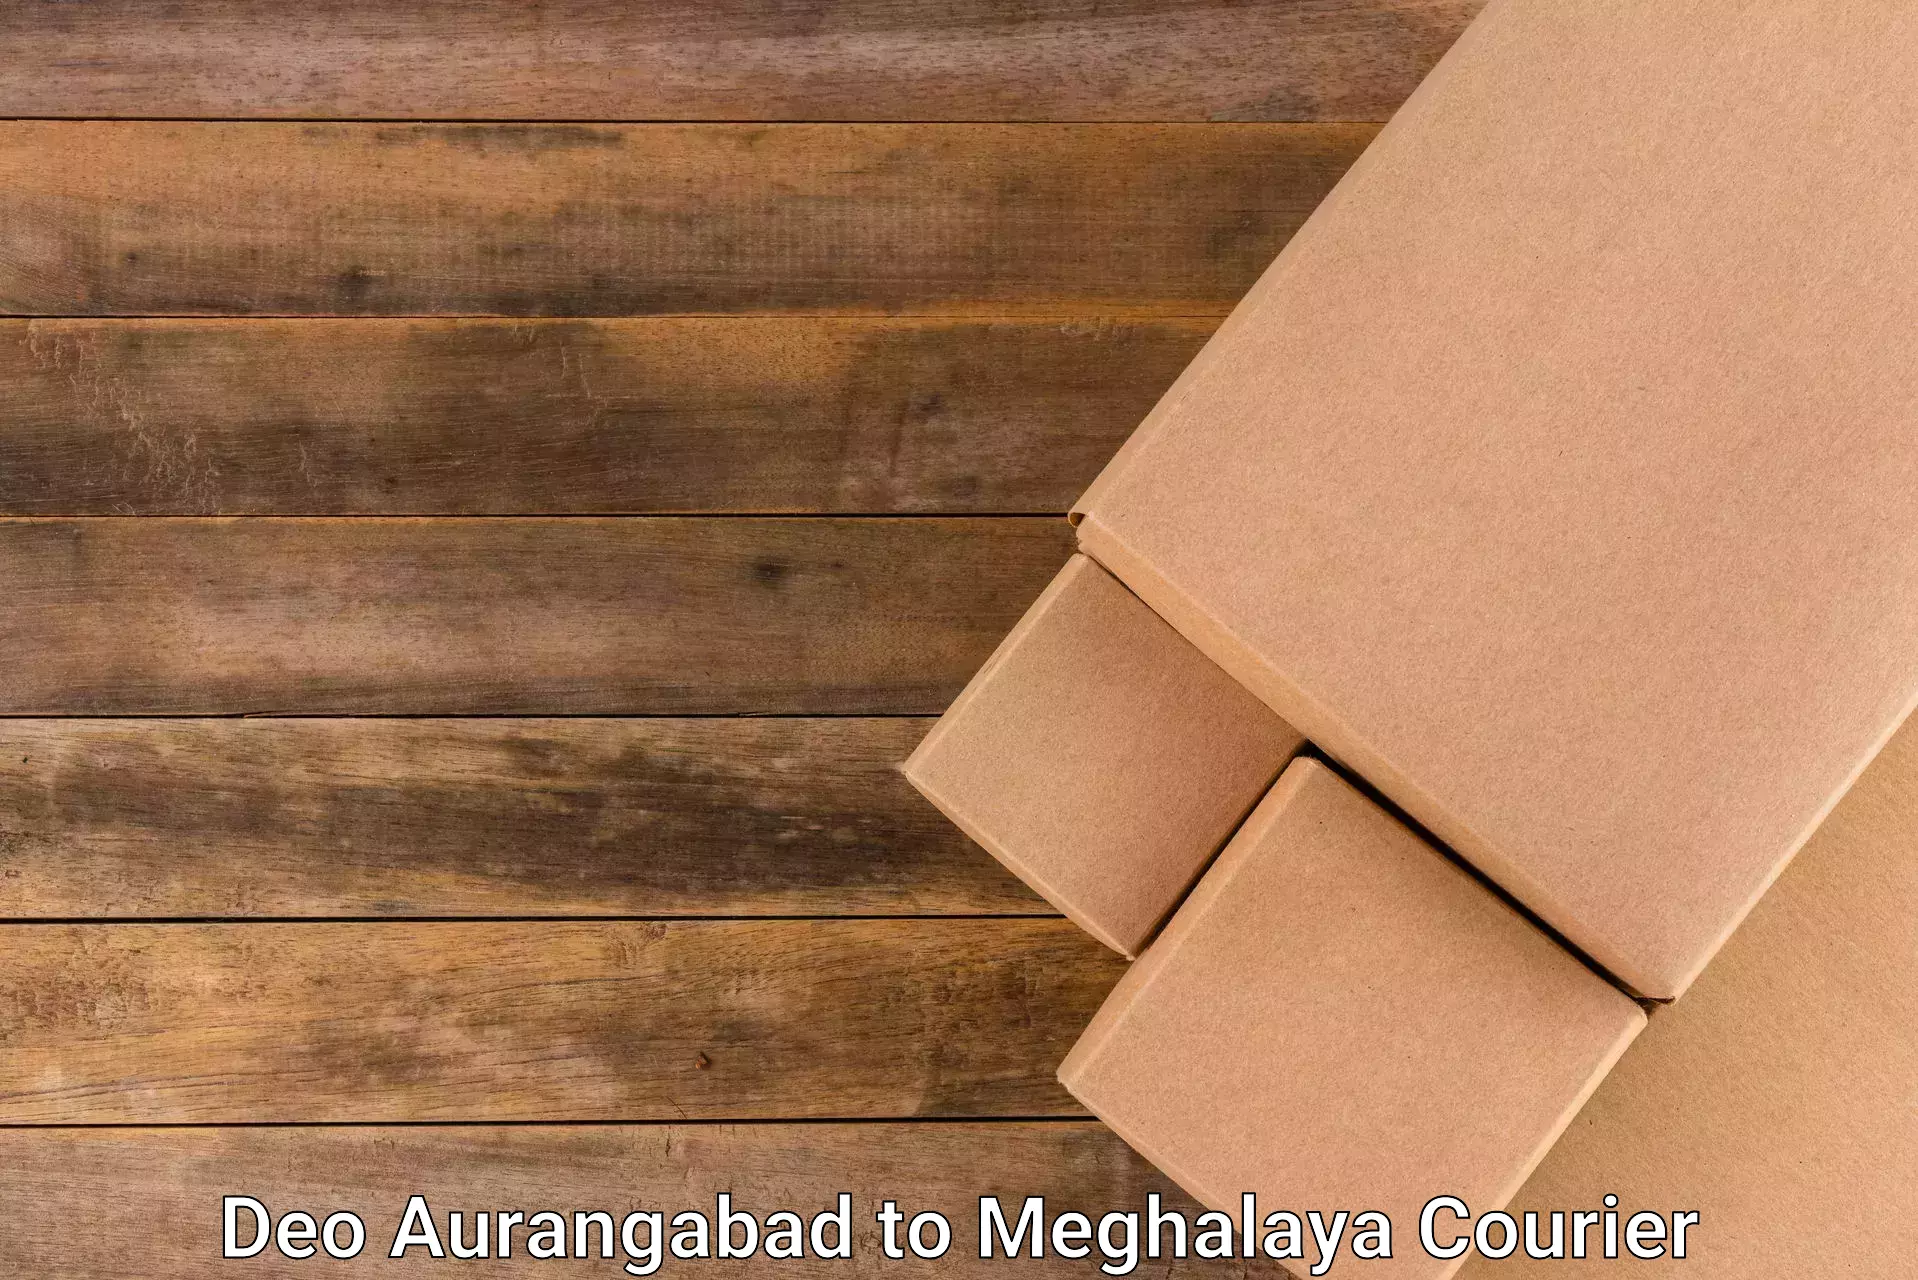 Personal parcel delivery Deo Aurangabad to Garobadha